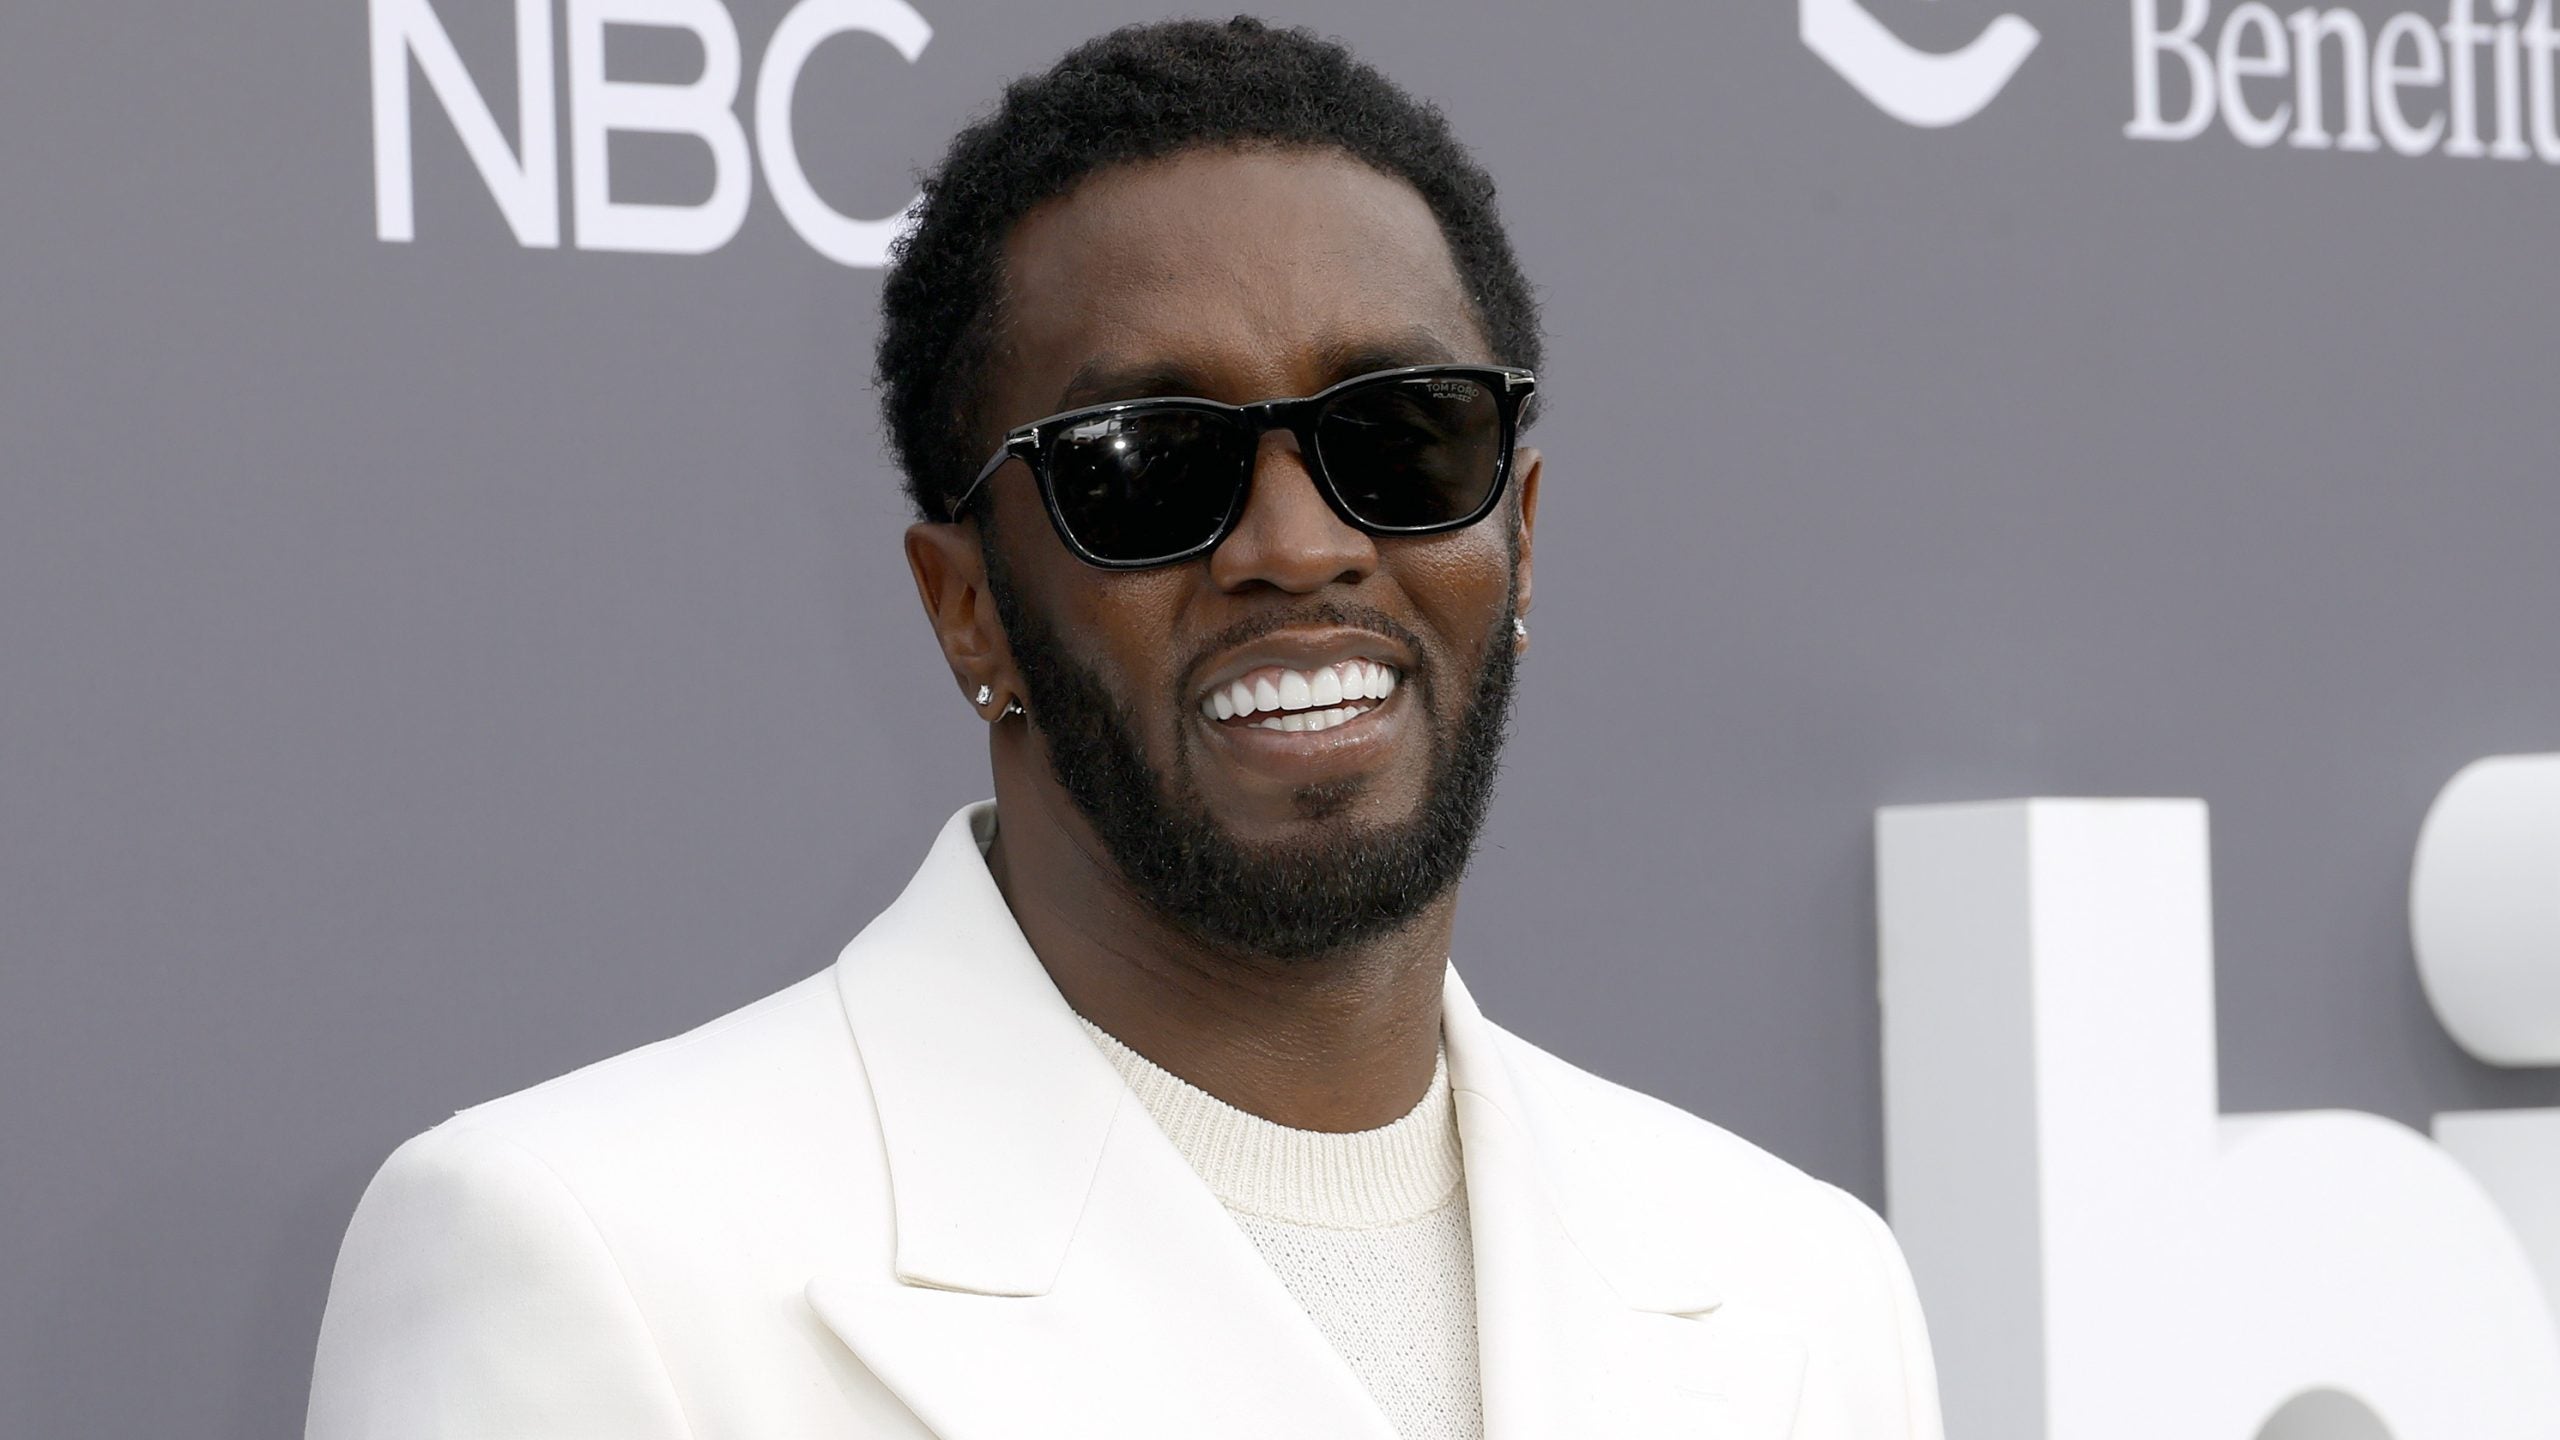 Sean ‘Diddy’ Combs Welcomes A New Baby To His Family